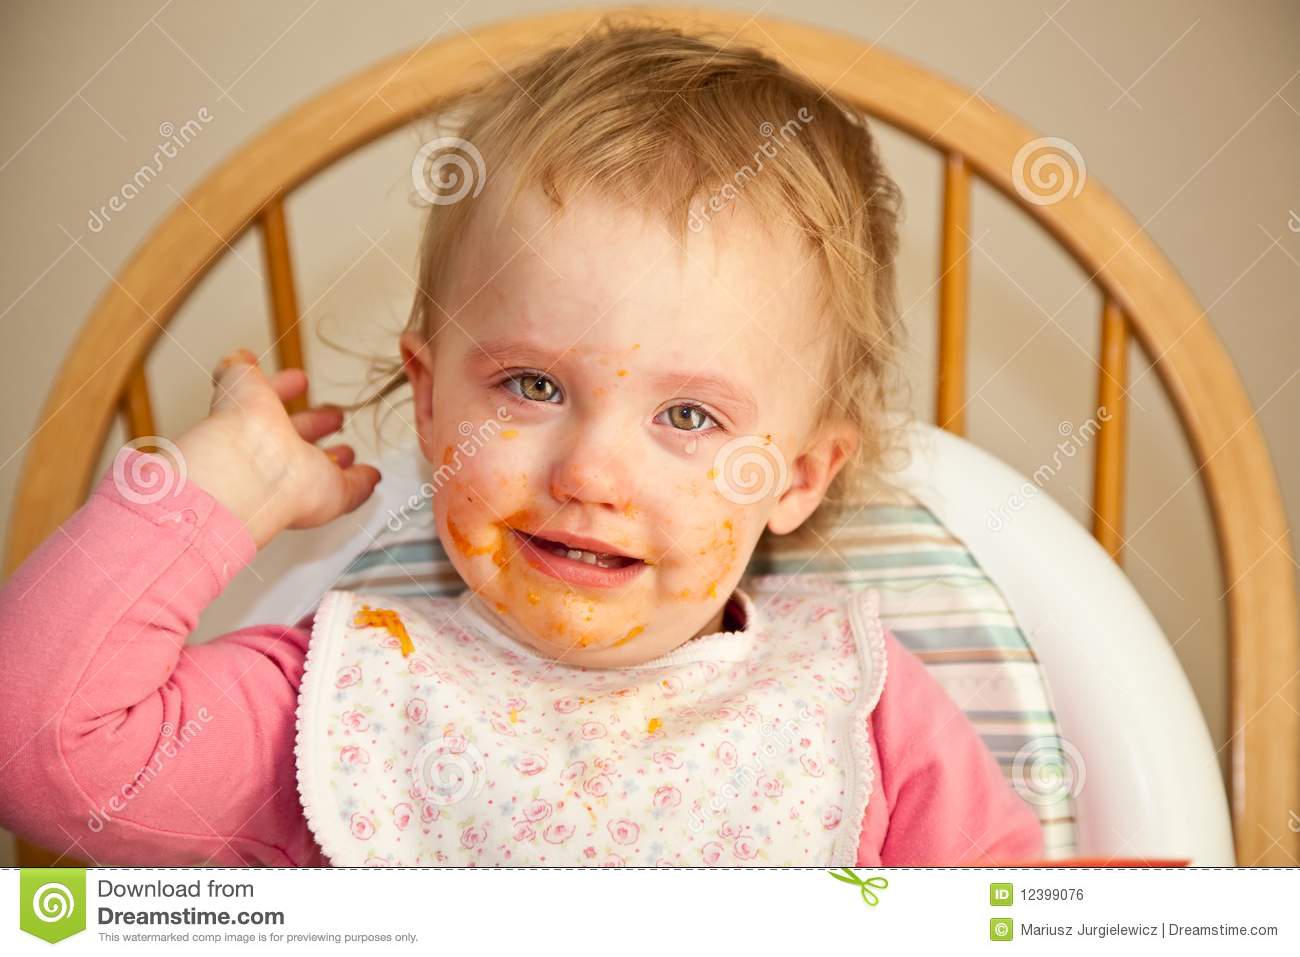 Messy Eater Royalty Free Stock Image   Image  12399076